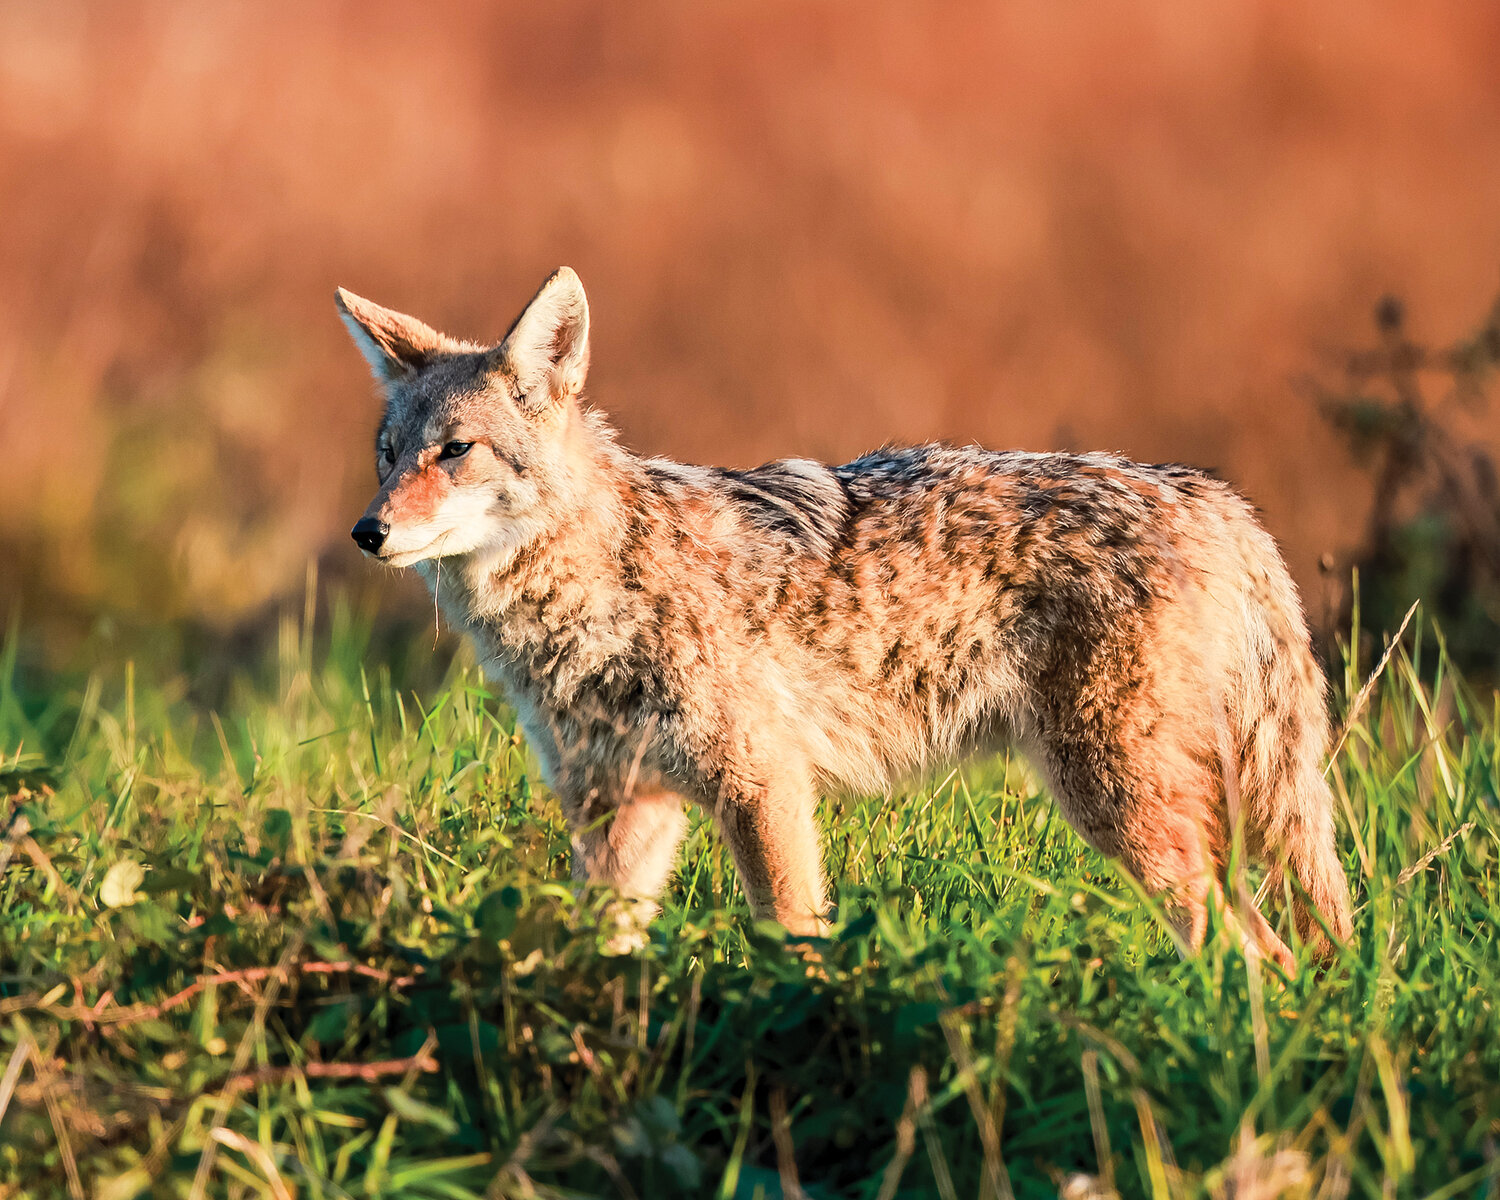 A healthy-looking coyote stands in the grass at the Ridgefield National Wildlife Refuge on Tuesday, Nov. 14. Coyotes play a crucial role in the Ridgefield National Wildlife Refuge ecosystem by helping control mice, rat and other small rodent populations. A 2021 article by the Friends of the Ridgefield National Wildlife Refuge referred to their presence as a “howling success.”